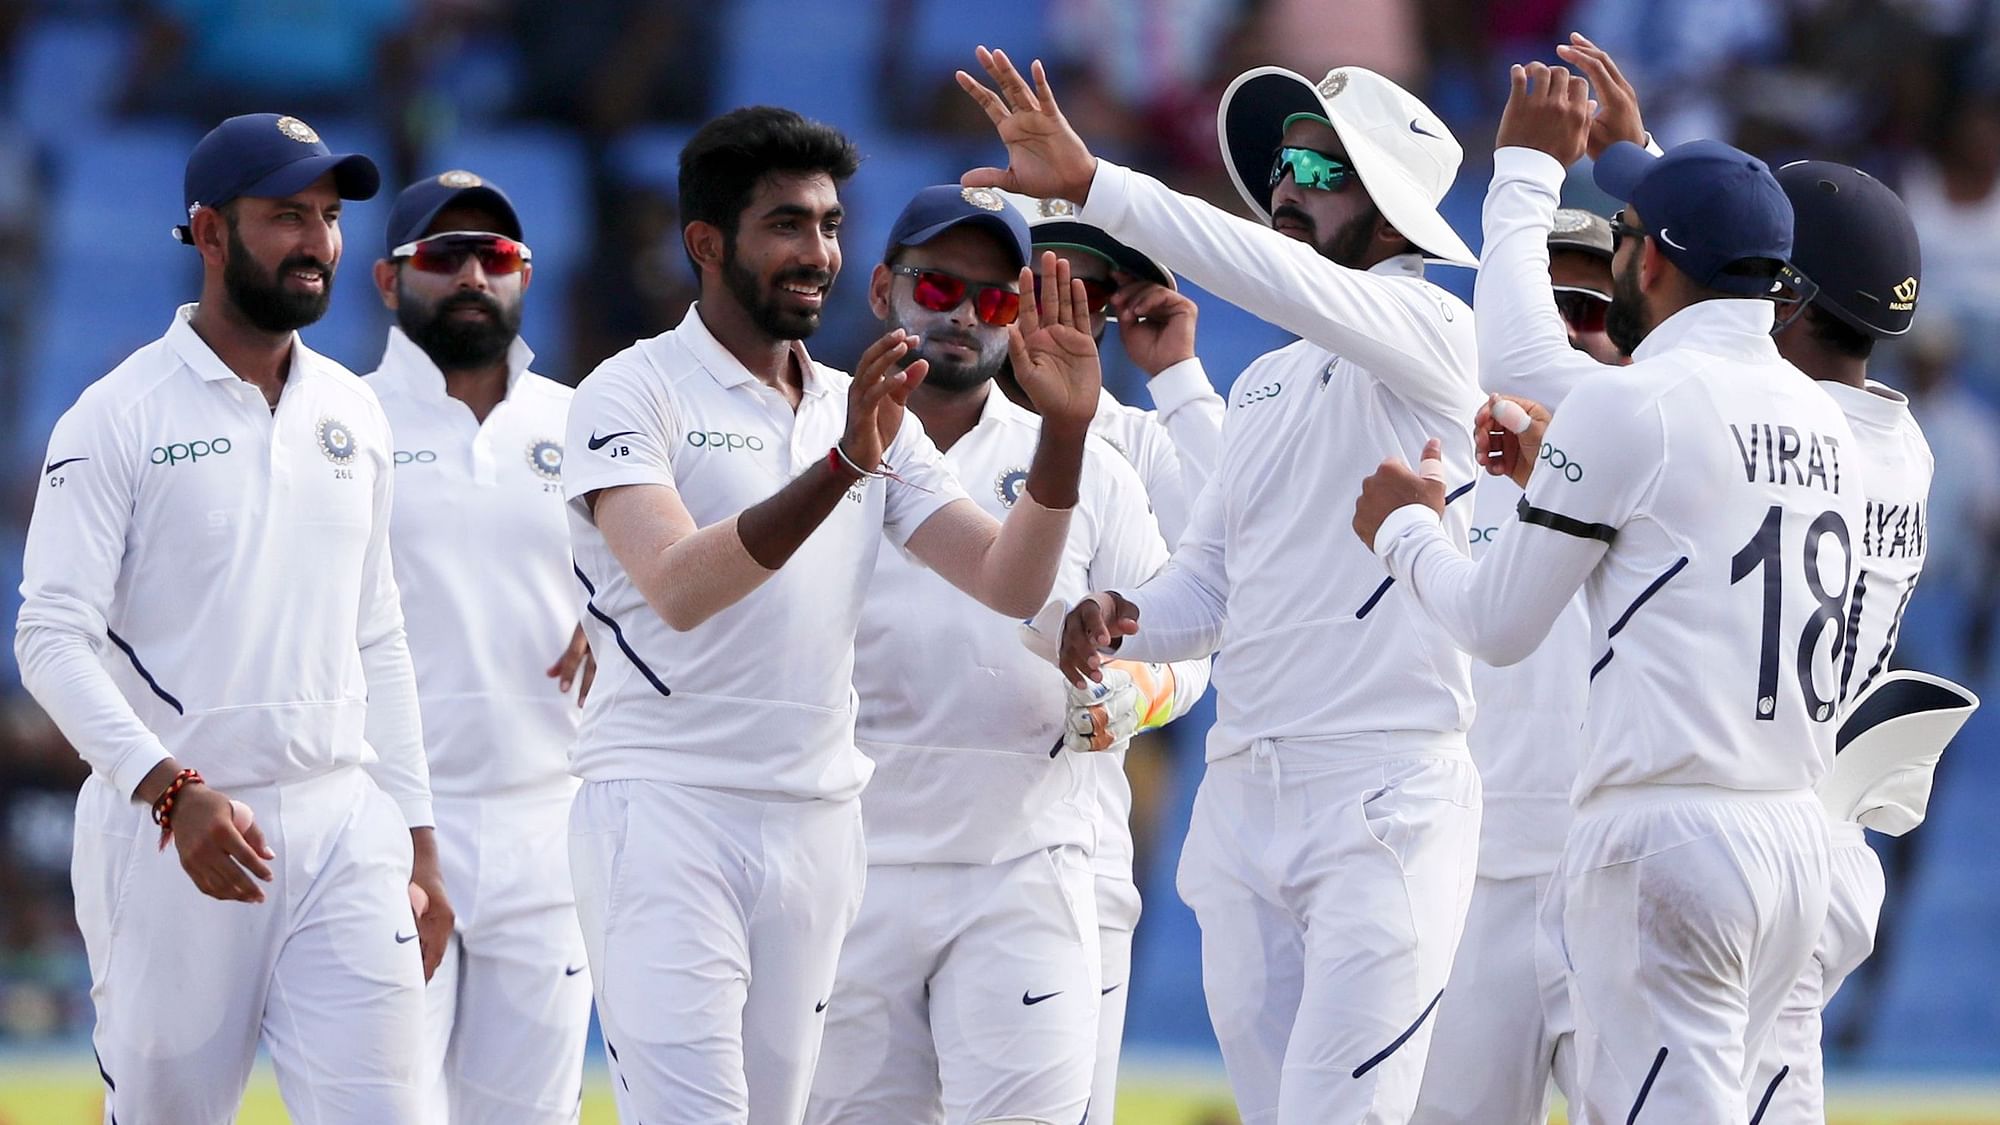 India beat West Indies at Antigua to take a 1-0 lead in the two-match Test series.